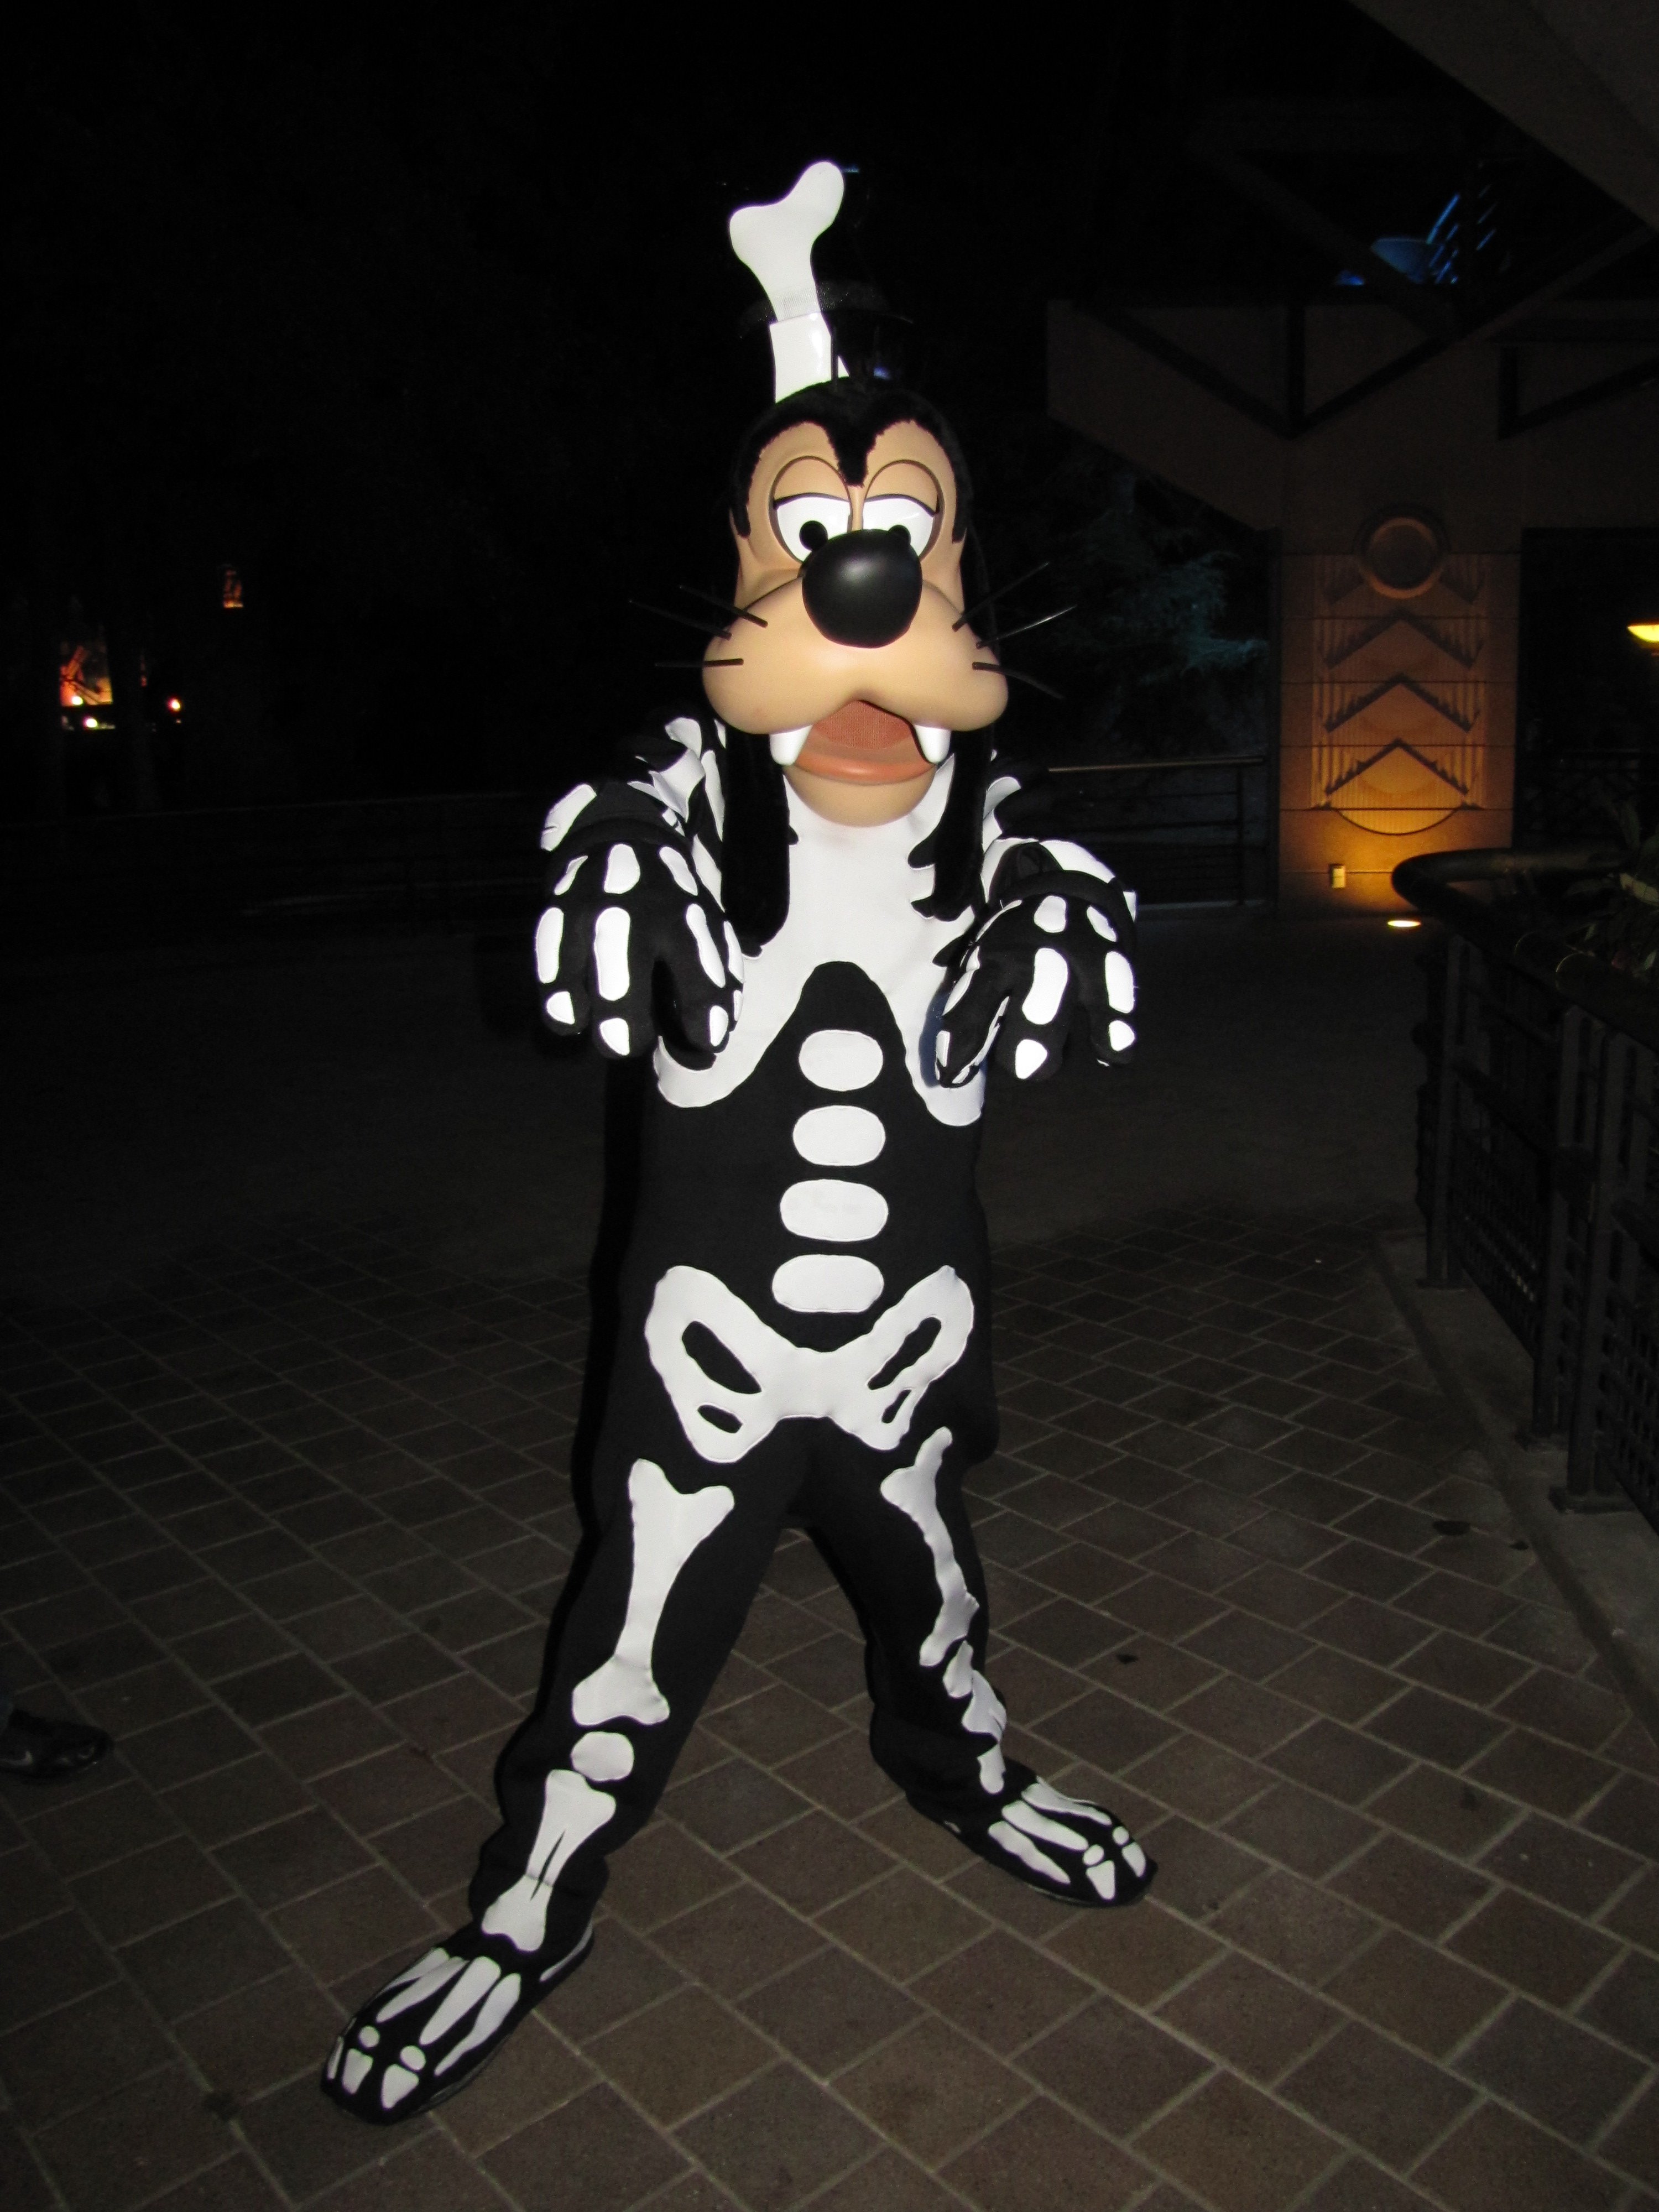 Goofy wearing his skeleton outfit during the Halloween Party 2011; this costume was also being used at the Halloween Show during Halloween season 2011 and 2012.